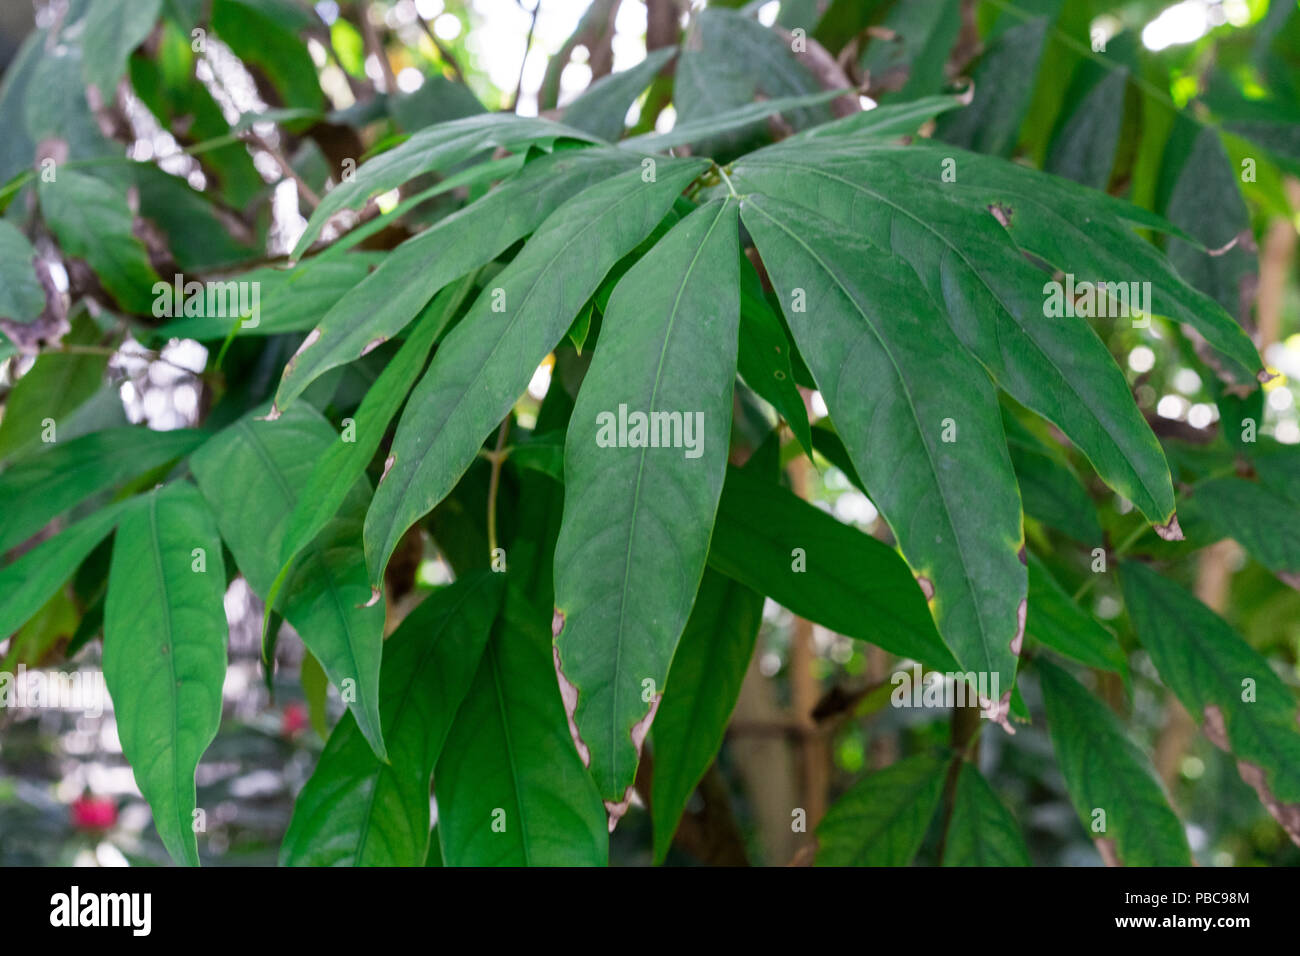 green leaves of saraca declinata fabaceae tree from thailand Stock Photo